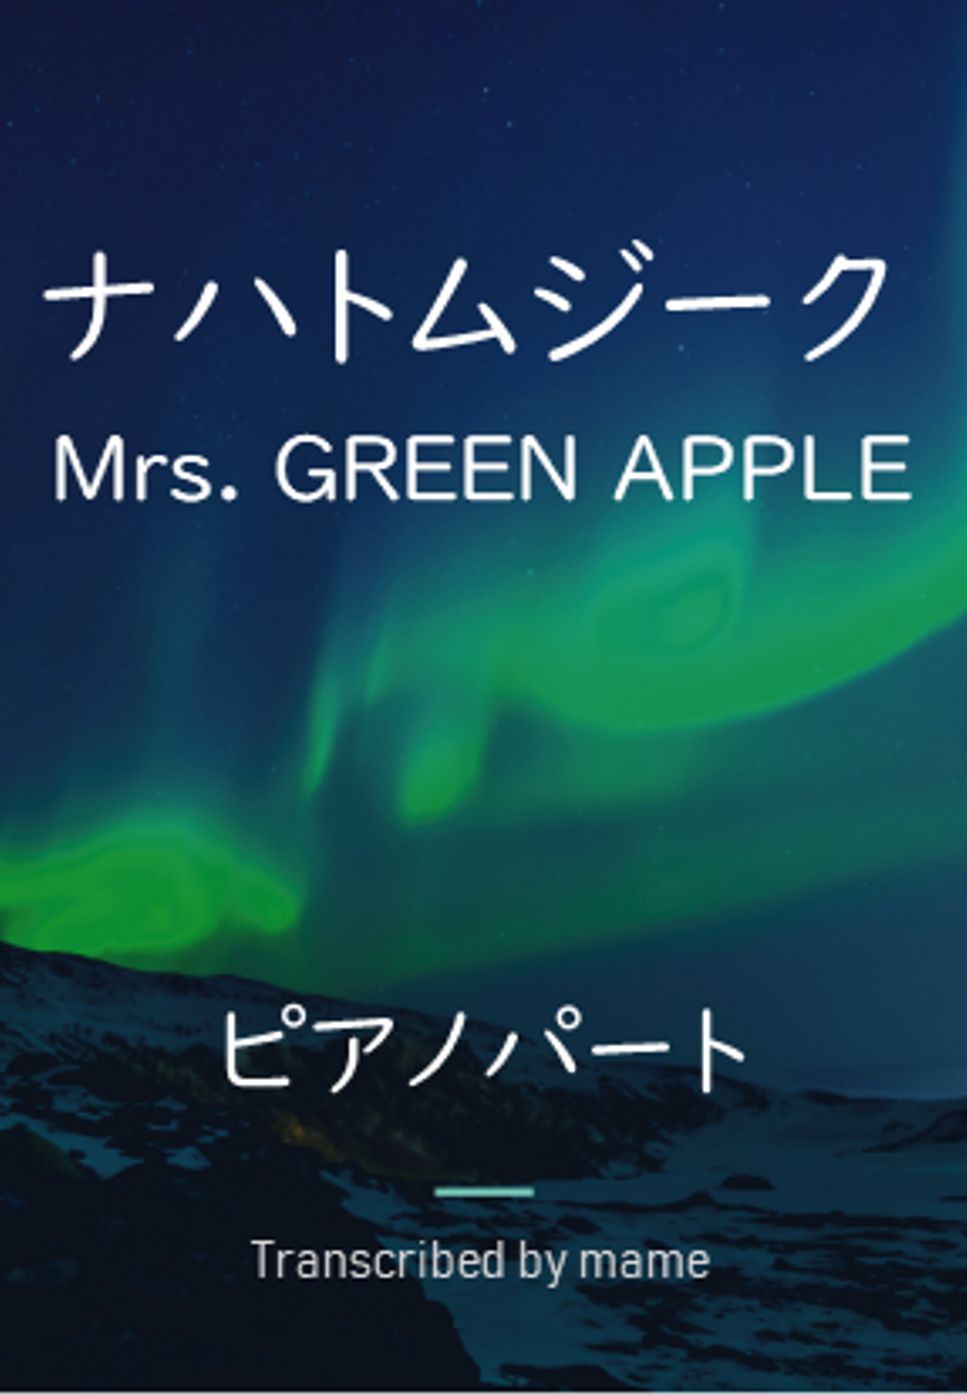 Mrs. GREEN APPLE - ナハトムジーク (piano part) by mame